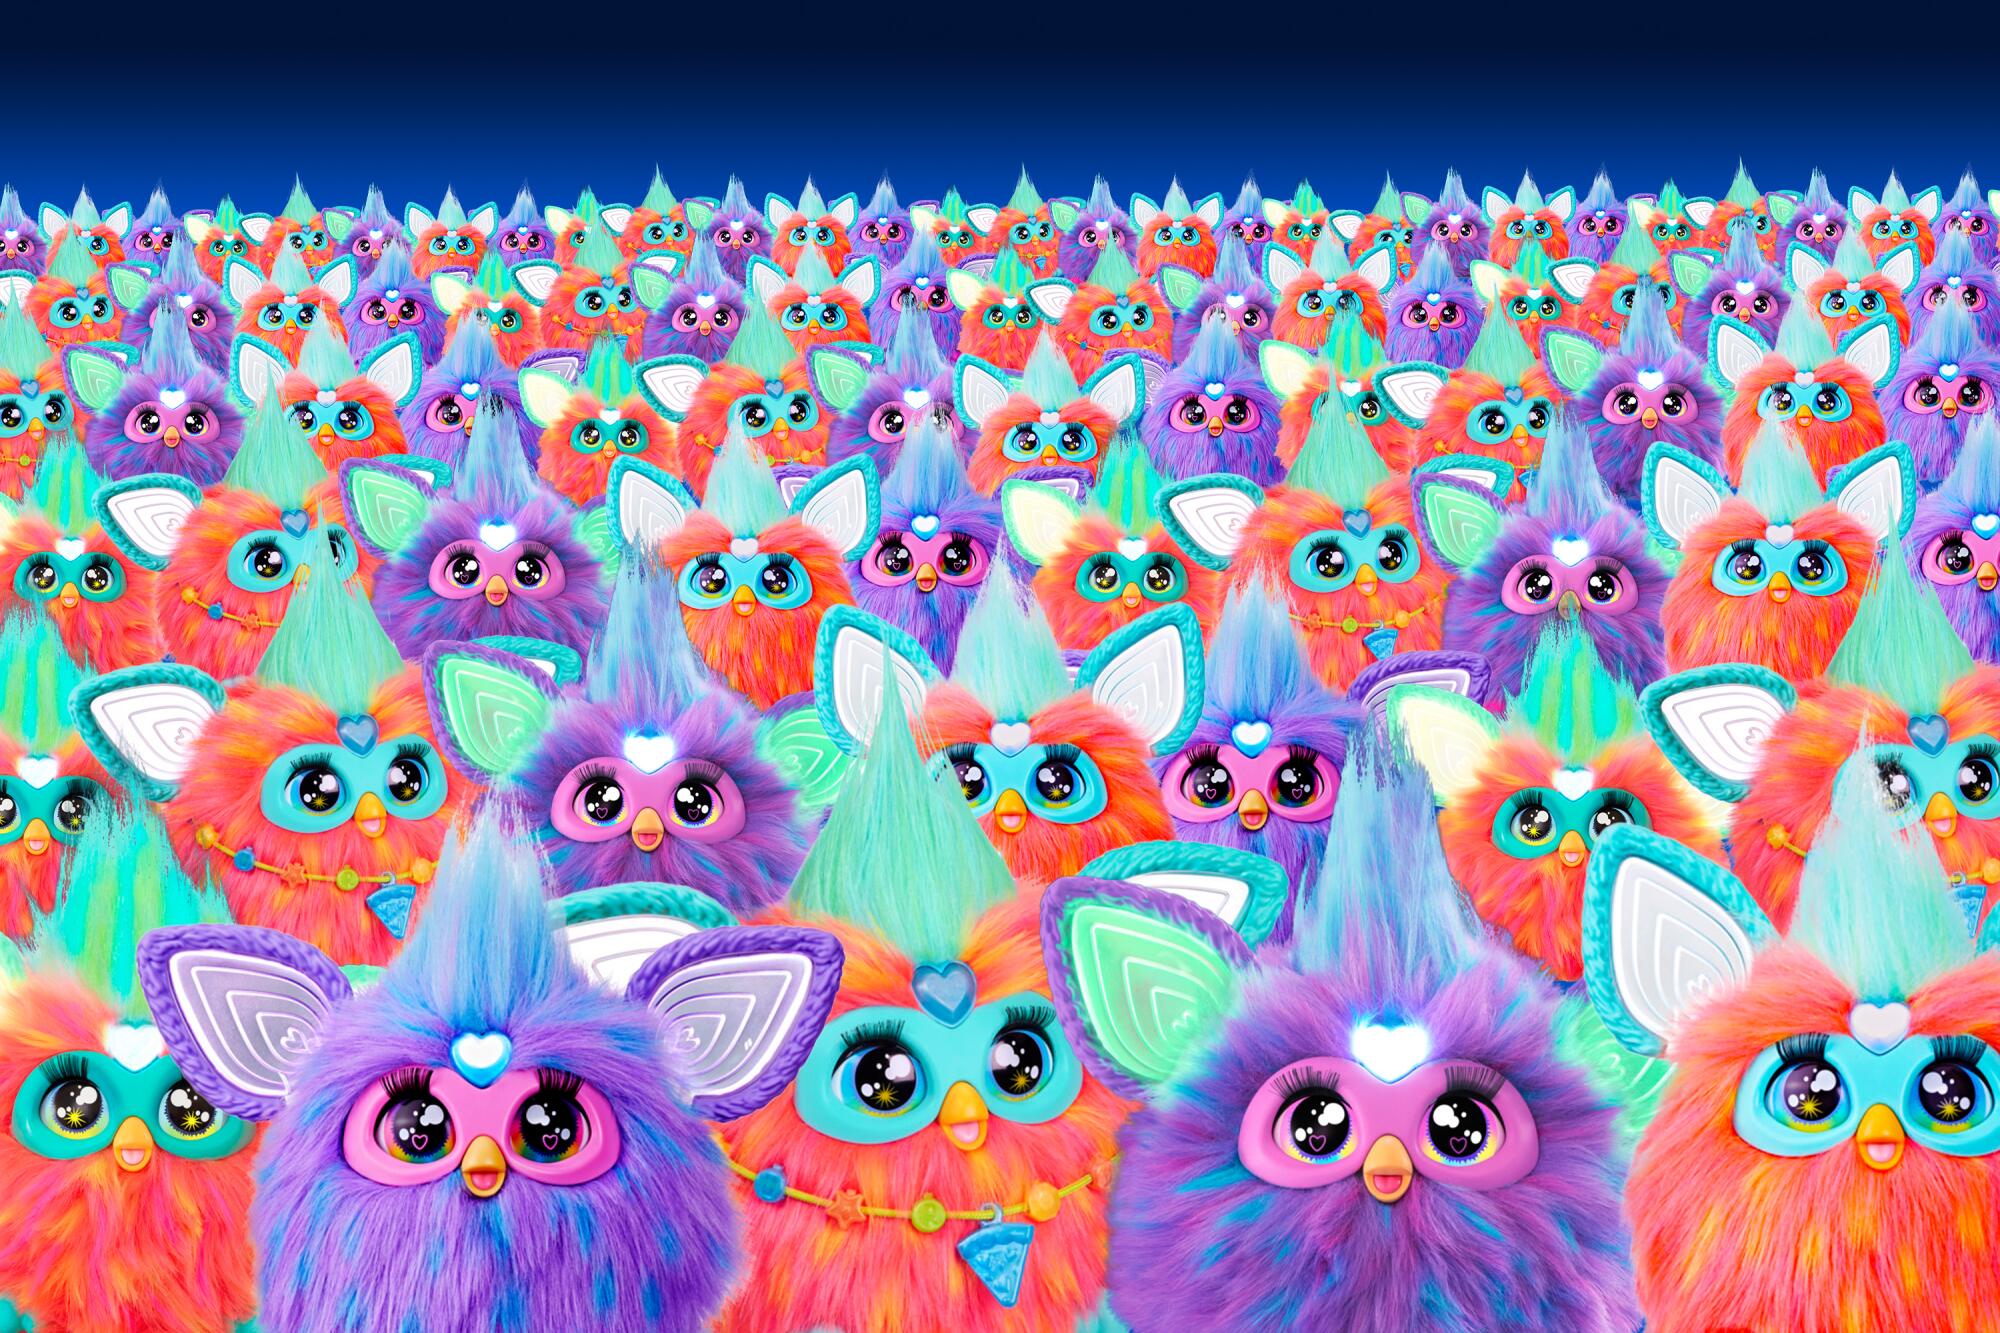 photo illustration of a swarm of Furbies standing together.